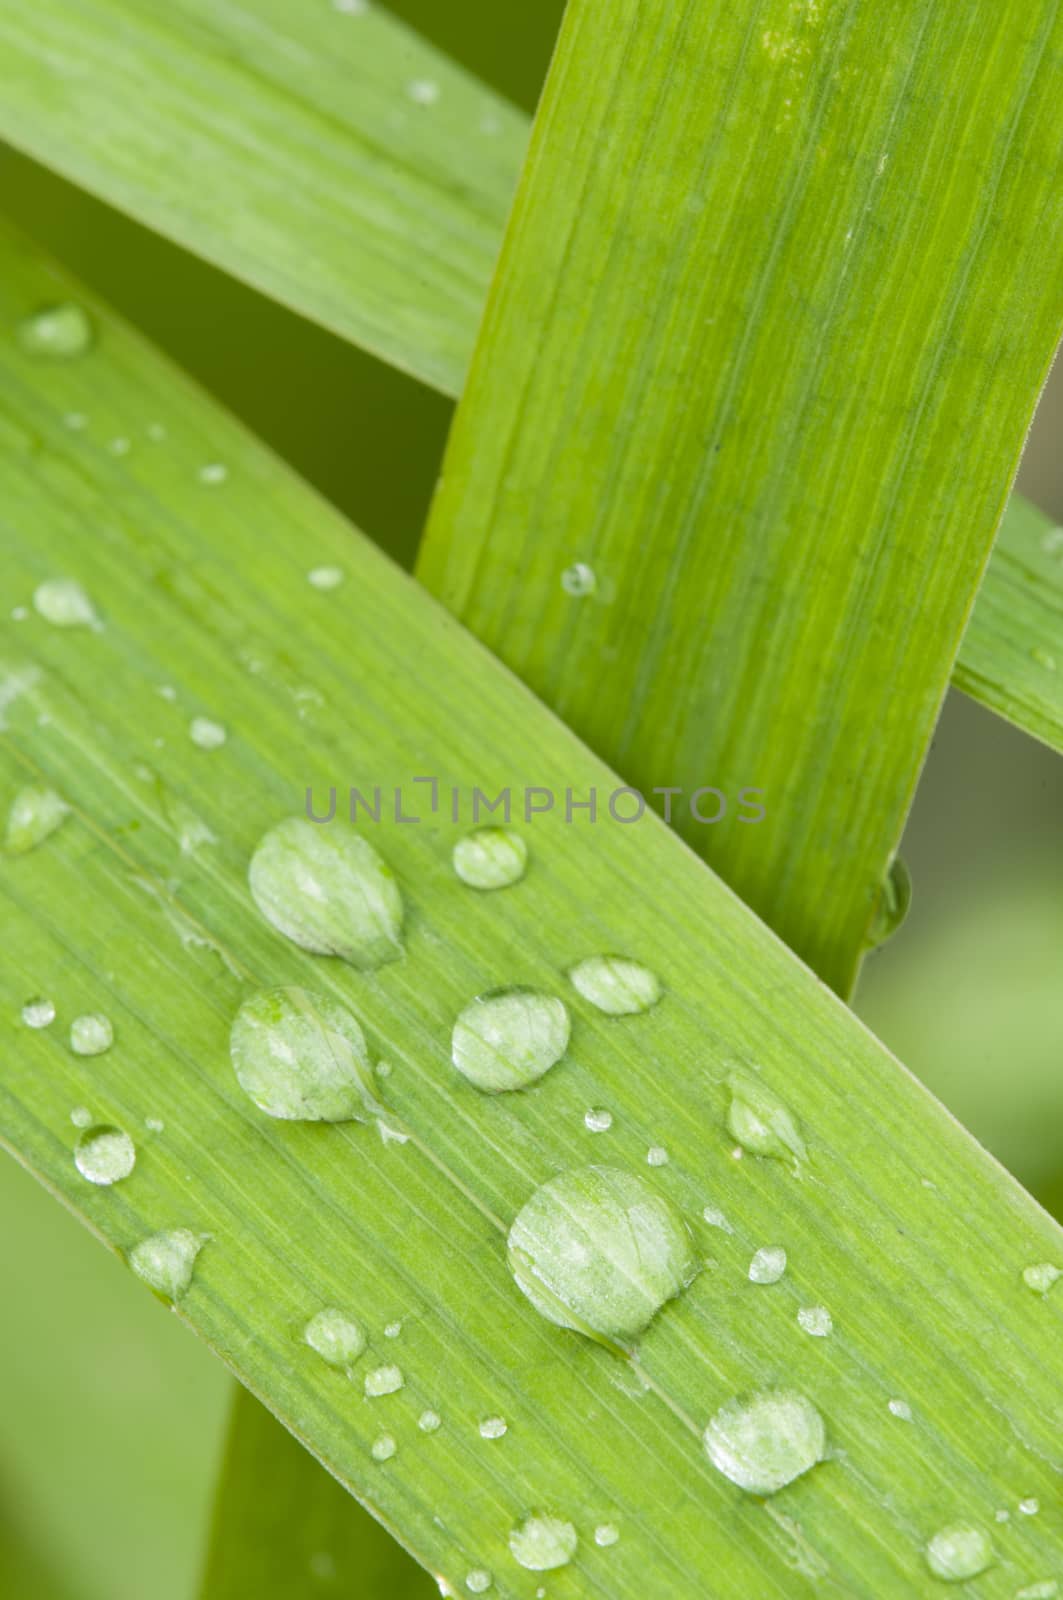 Dew drops on green blades of grass by AlessandroZocc